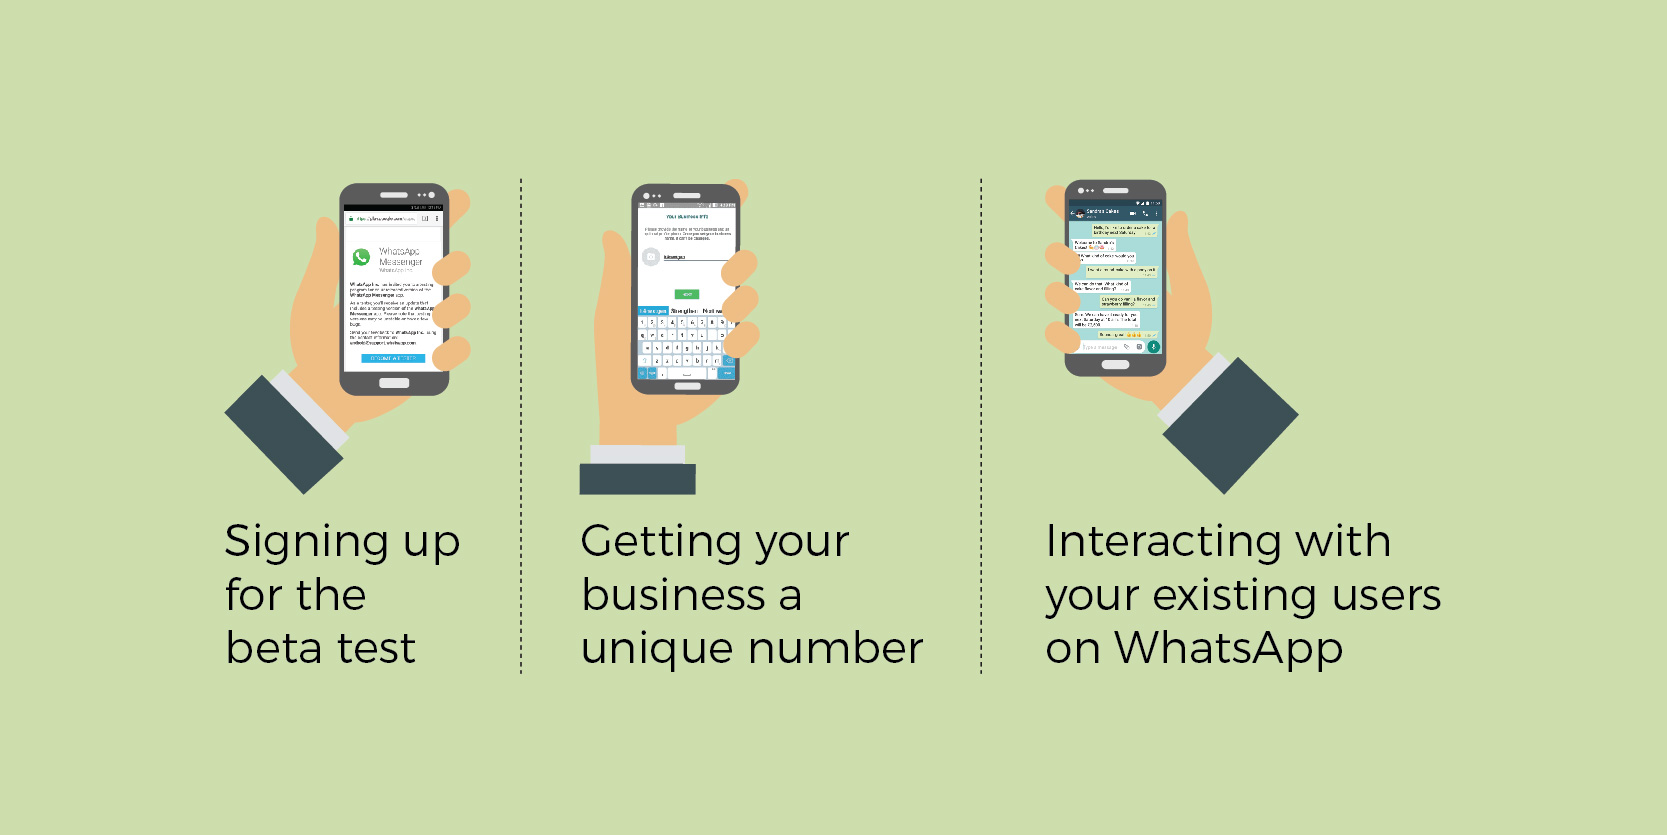 whatsapp for business use